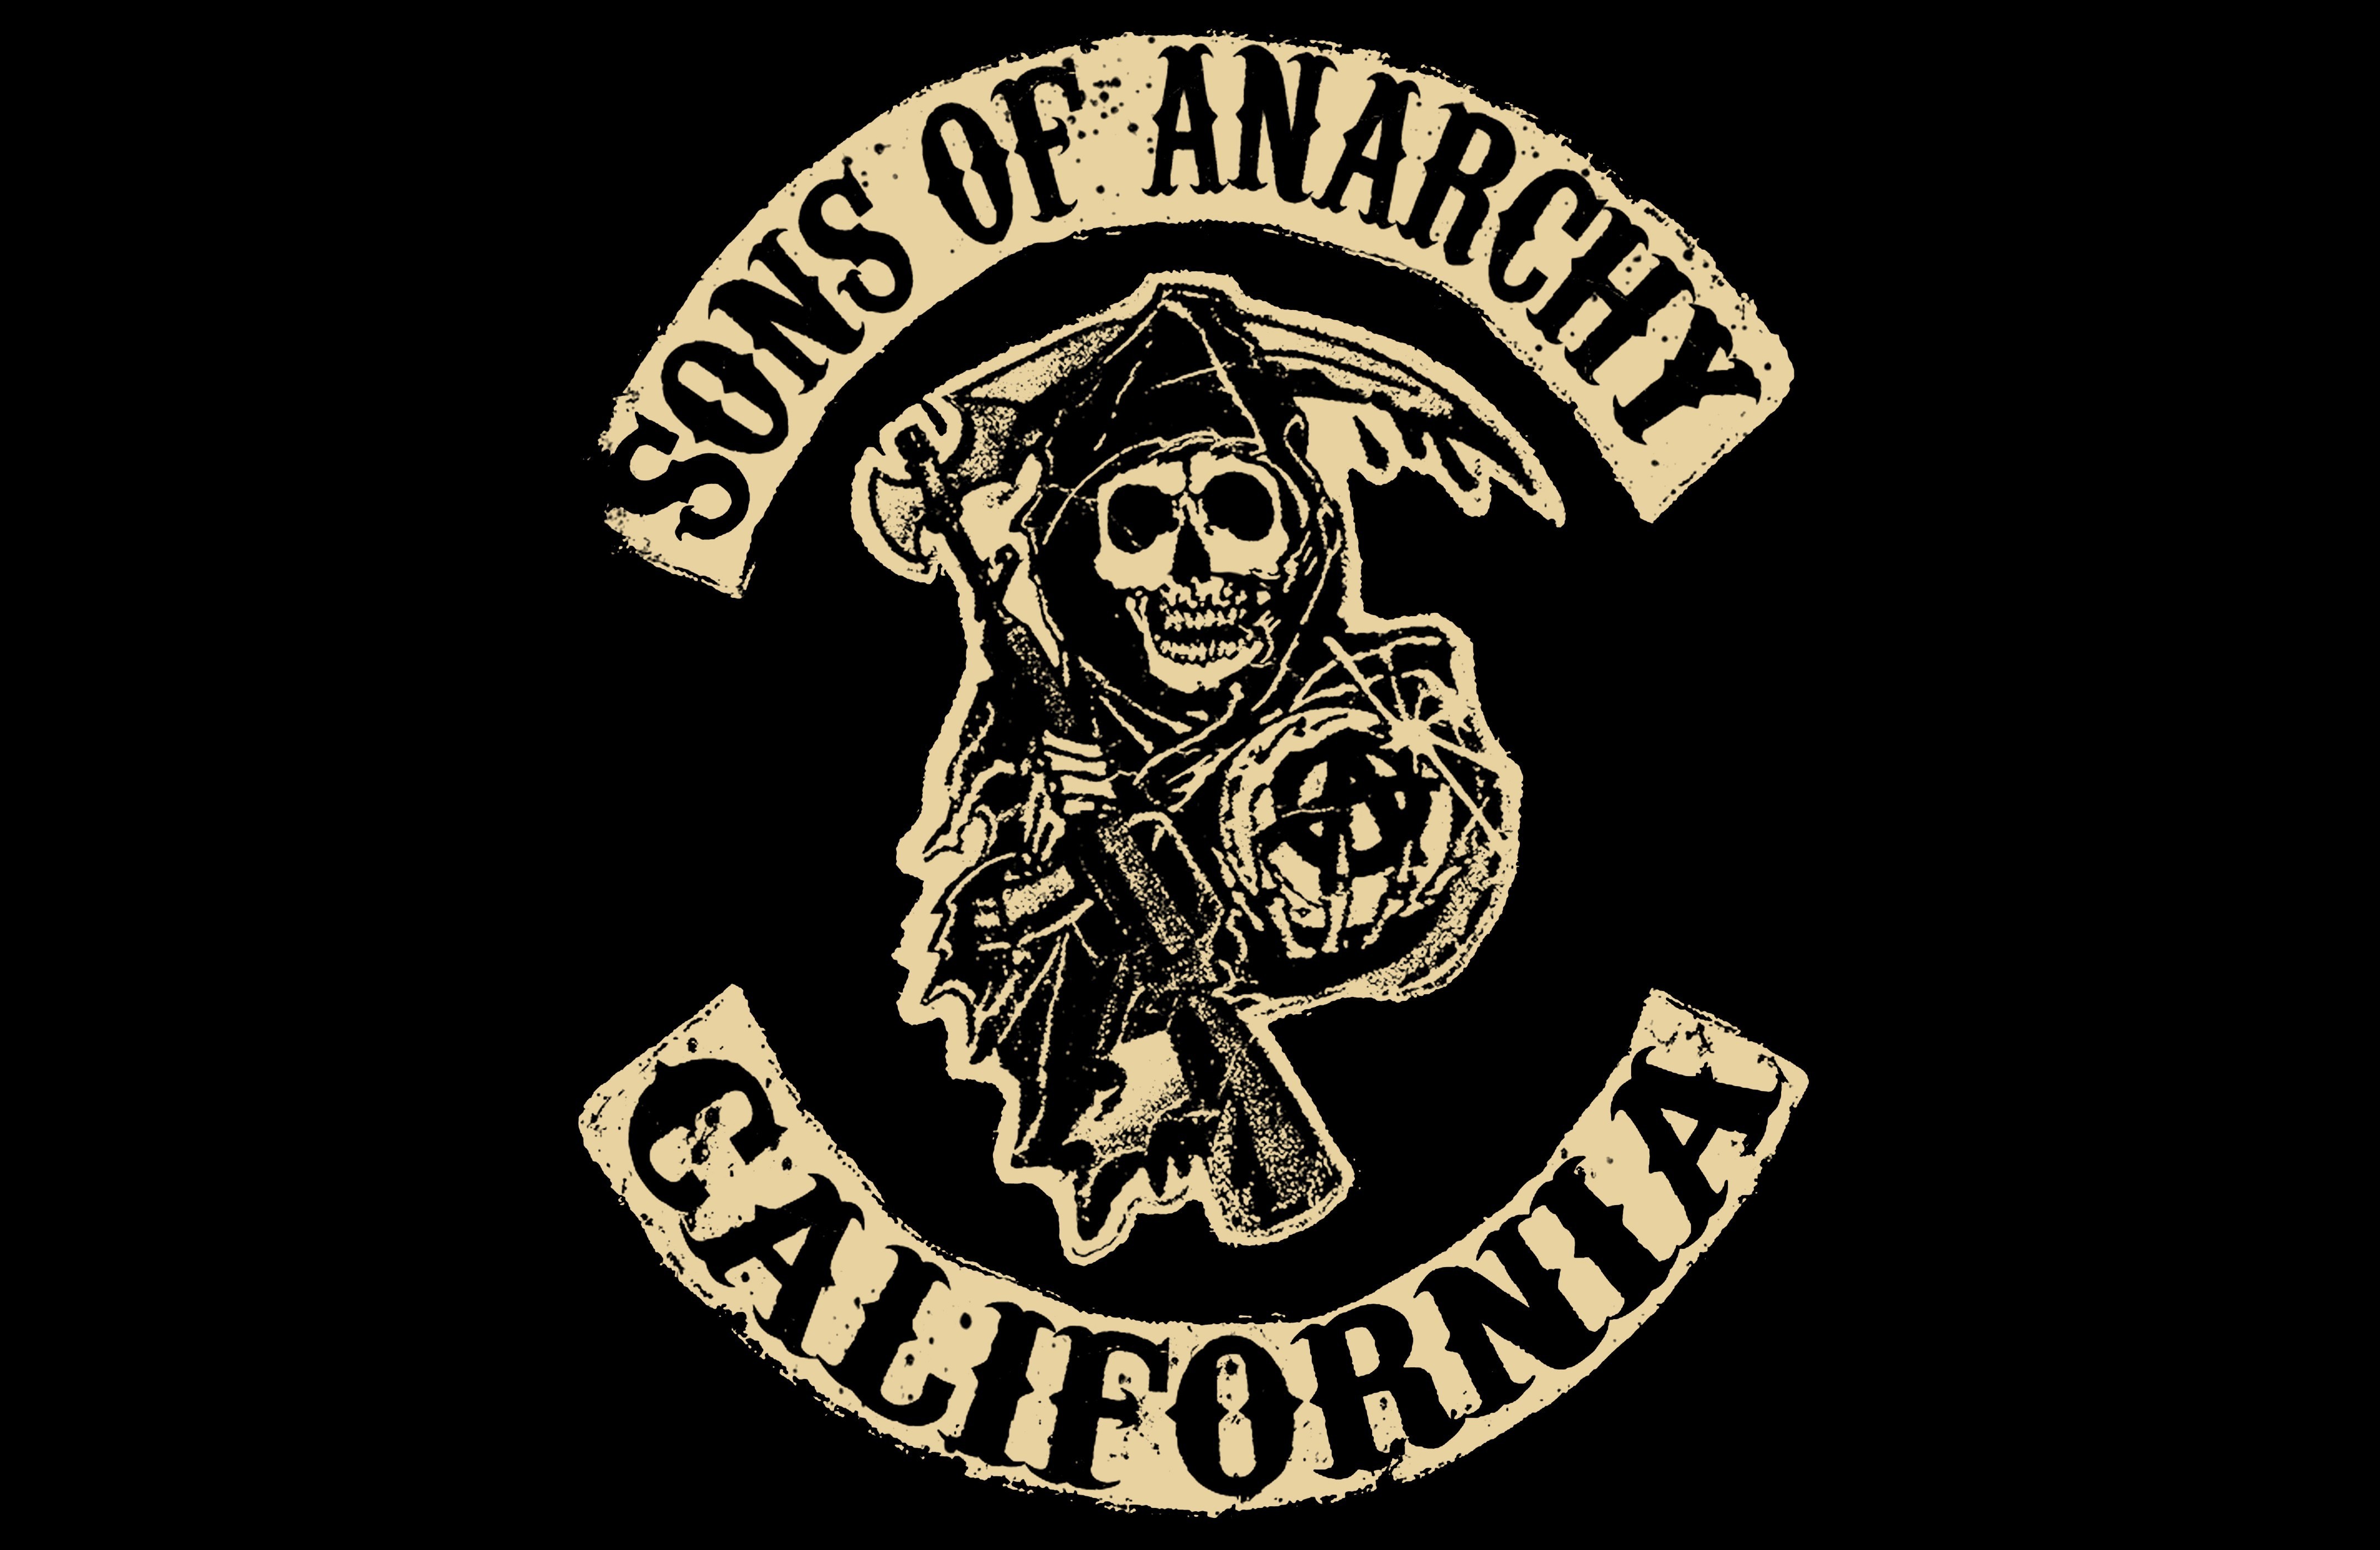 1920x10801148 sons of anarchy, tv series, logo 1920x10801148 Resolution